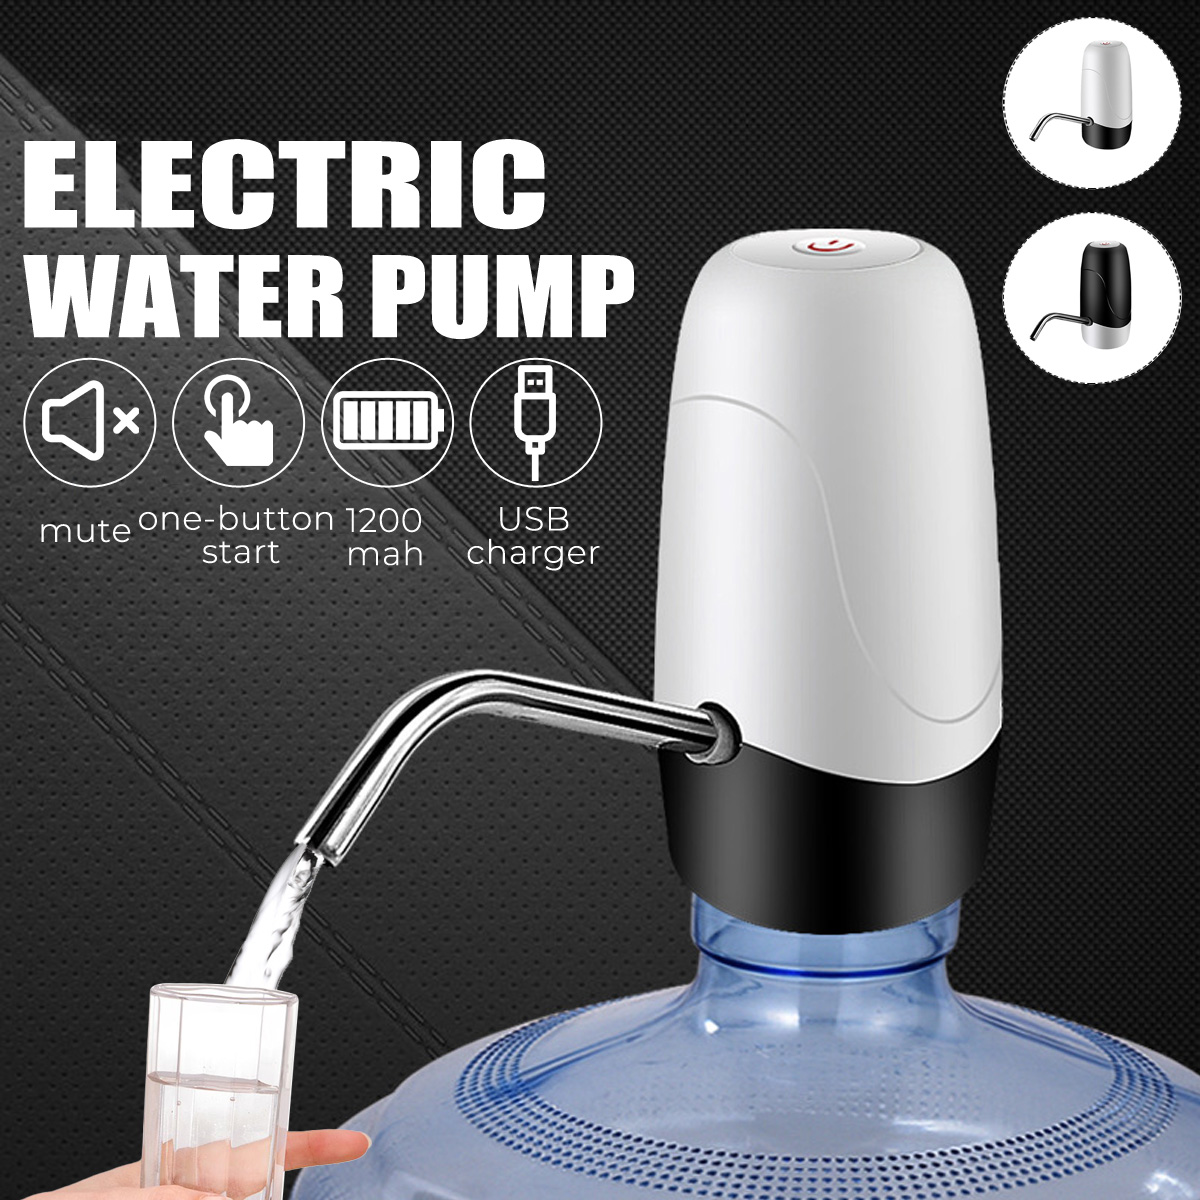 37V-USB-Rechargeable-Automatic-Electric-Water-Pump-Dispenser-Drinking-Bottle-Outdoor-1568197-1